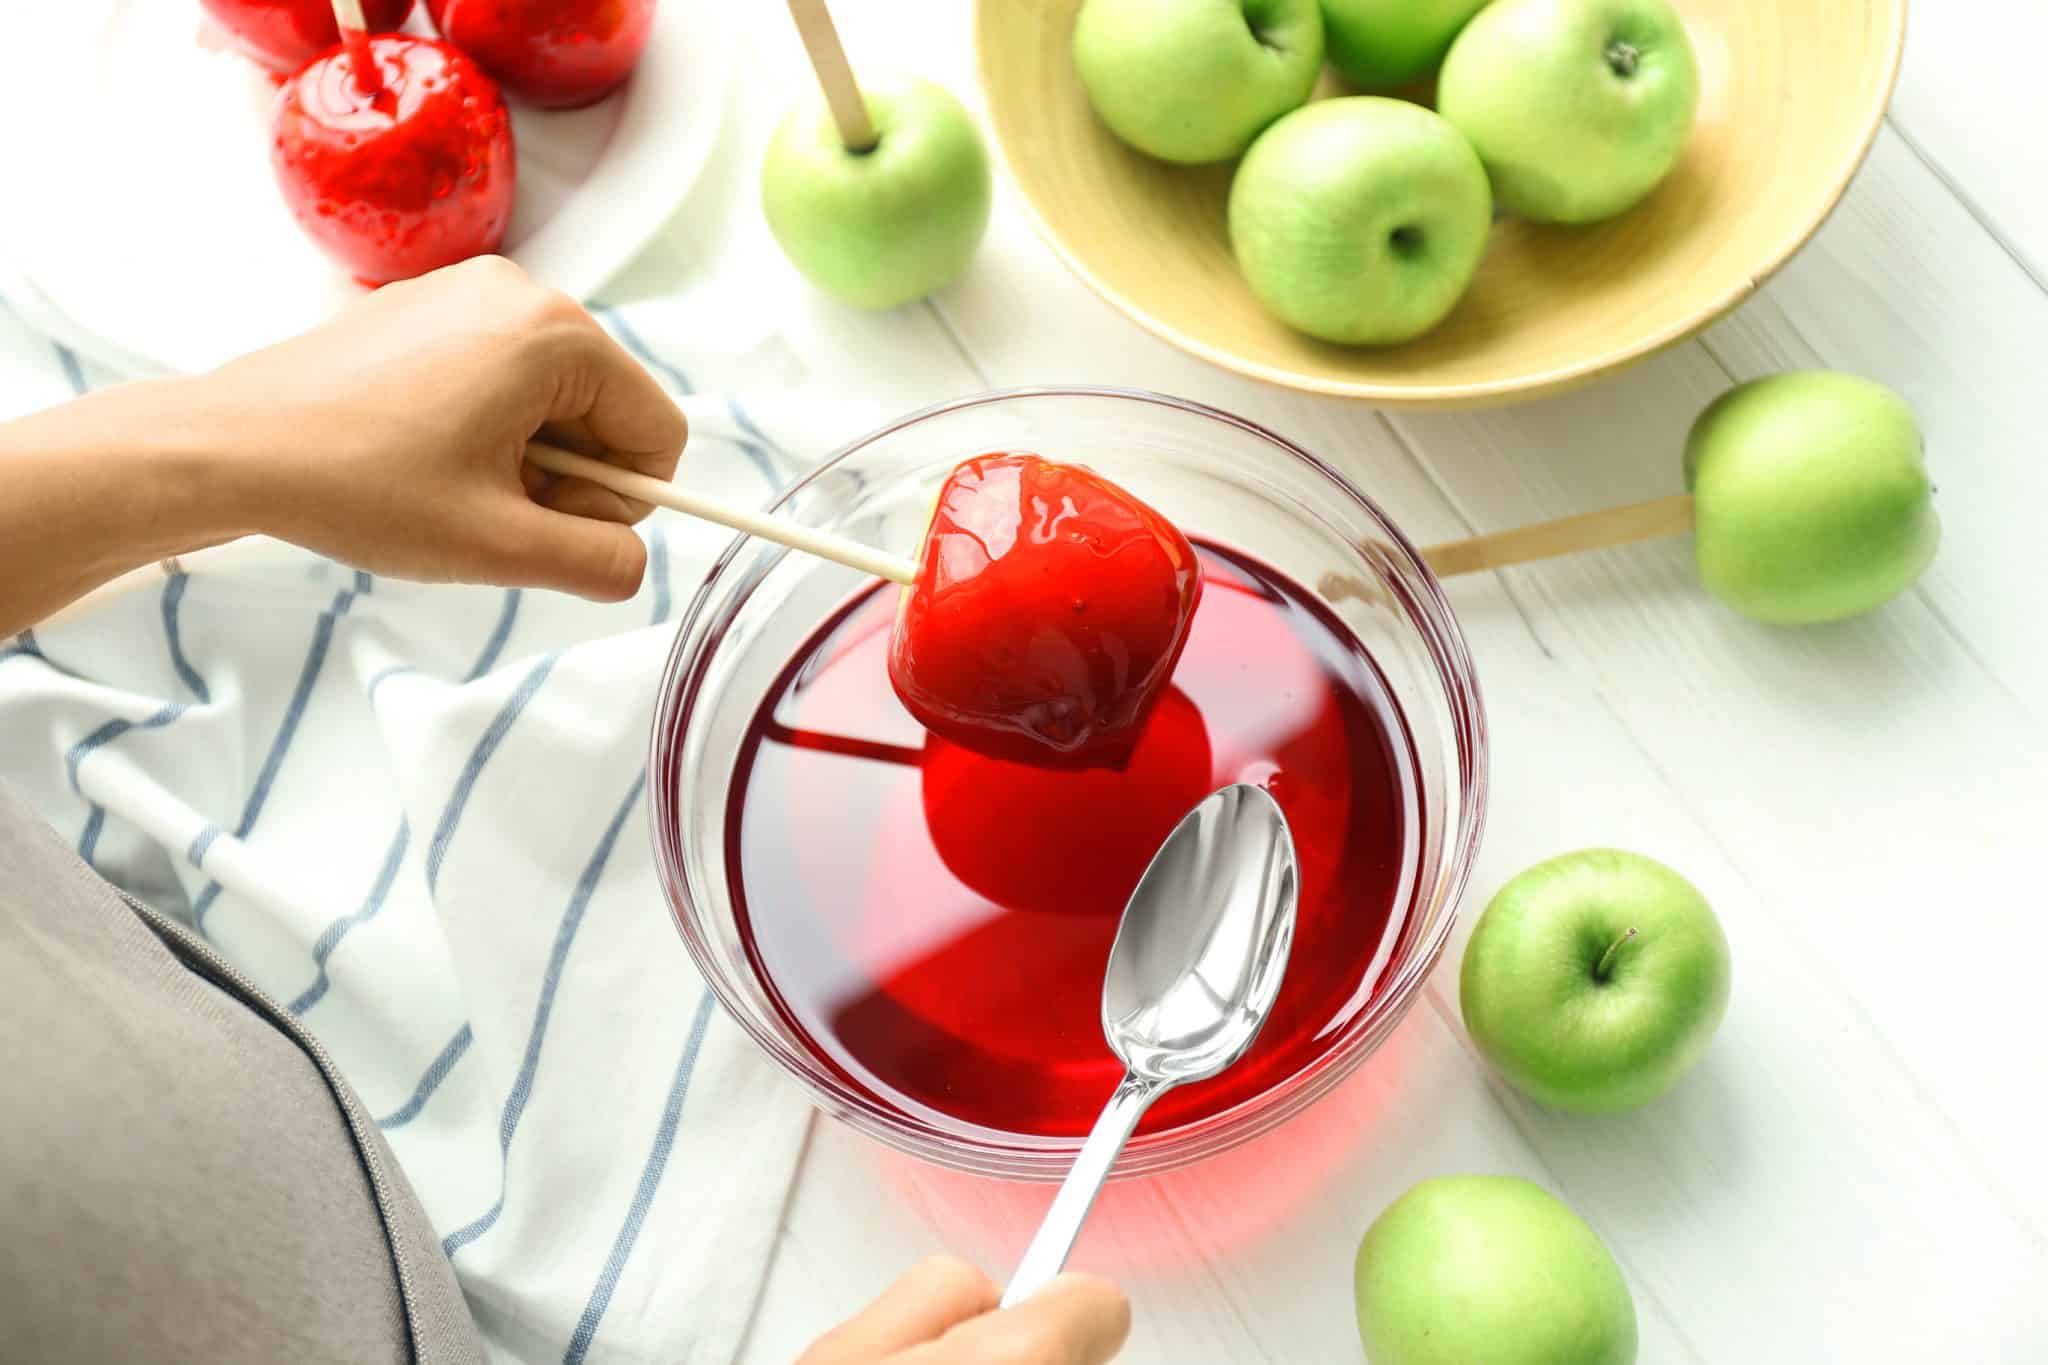 The classic candied apple is a beautifully colorful, glassy red apple. A lollipop candy coating with lush and slightly sour crunchy apple inside. #candiedapples www.savoryexperiments.com 